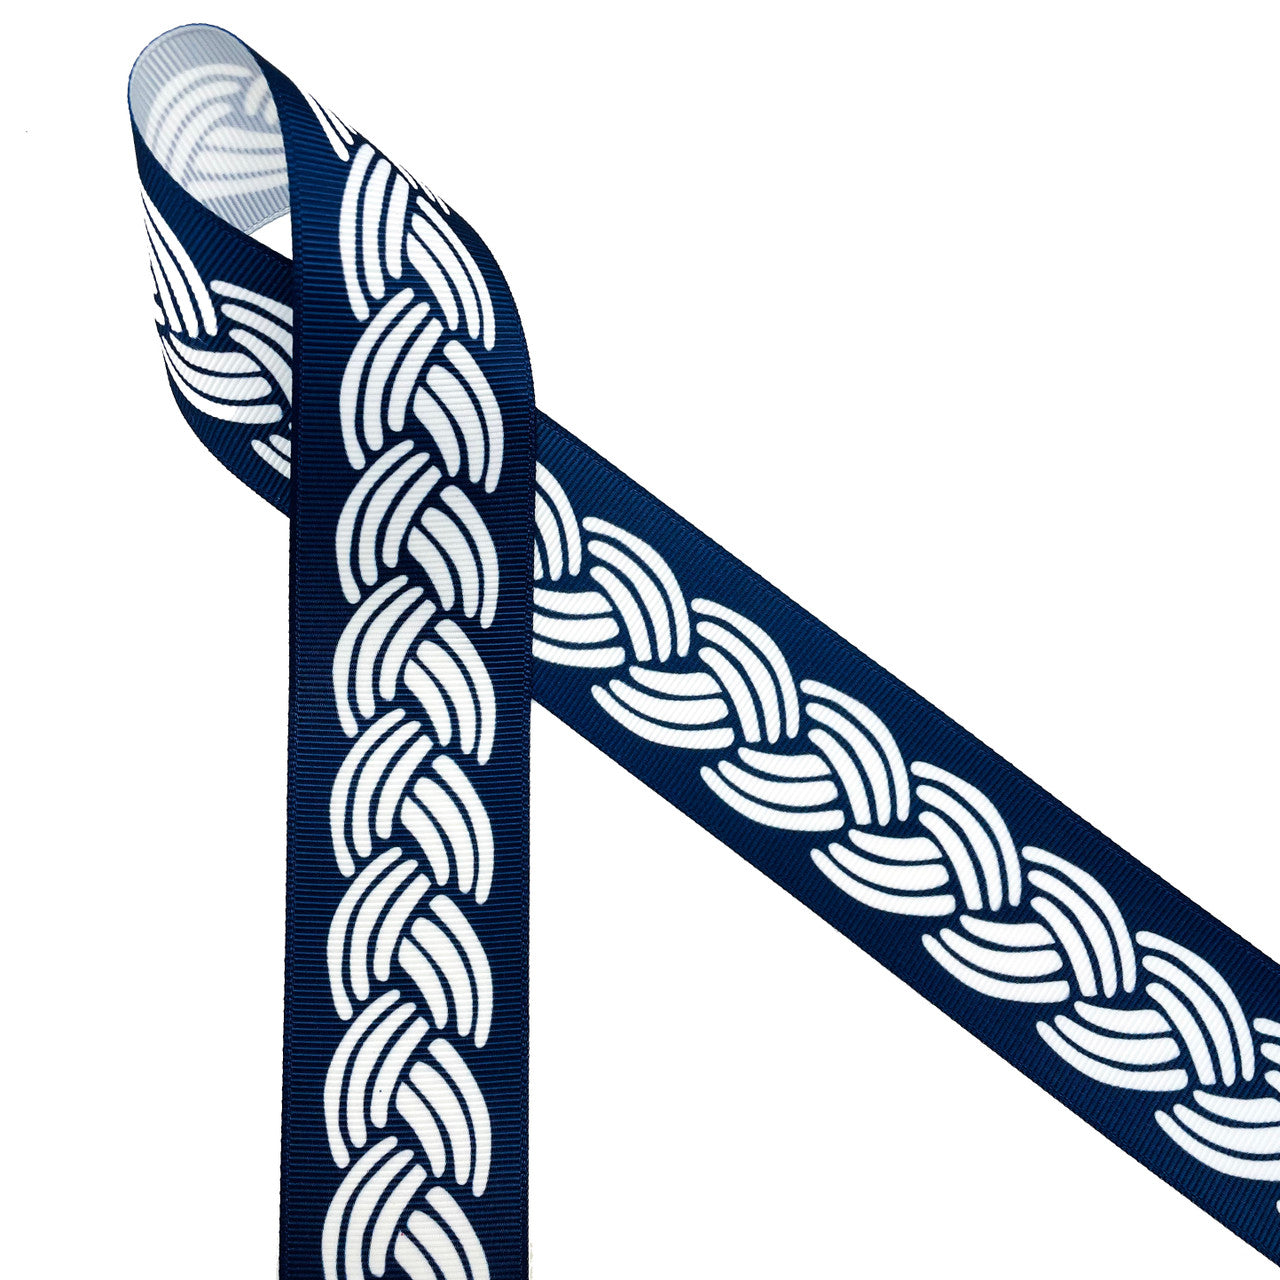 Nautical rope in white on a navy blue background printed on 1.5" white grosgrain ribbon is ideal for any Summer preppy party! This is a great ribbon for hair bows, headbands, hat bands, party decor, quilting and sewing projects! All our ribbon is designed and printed in the USA